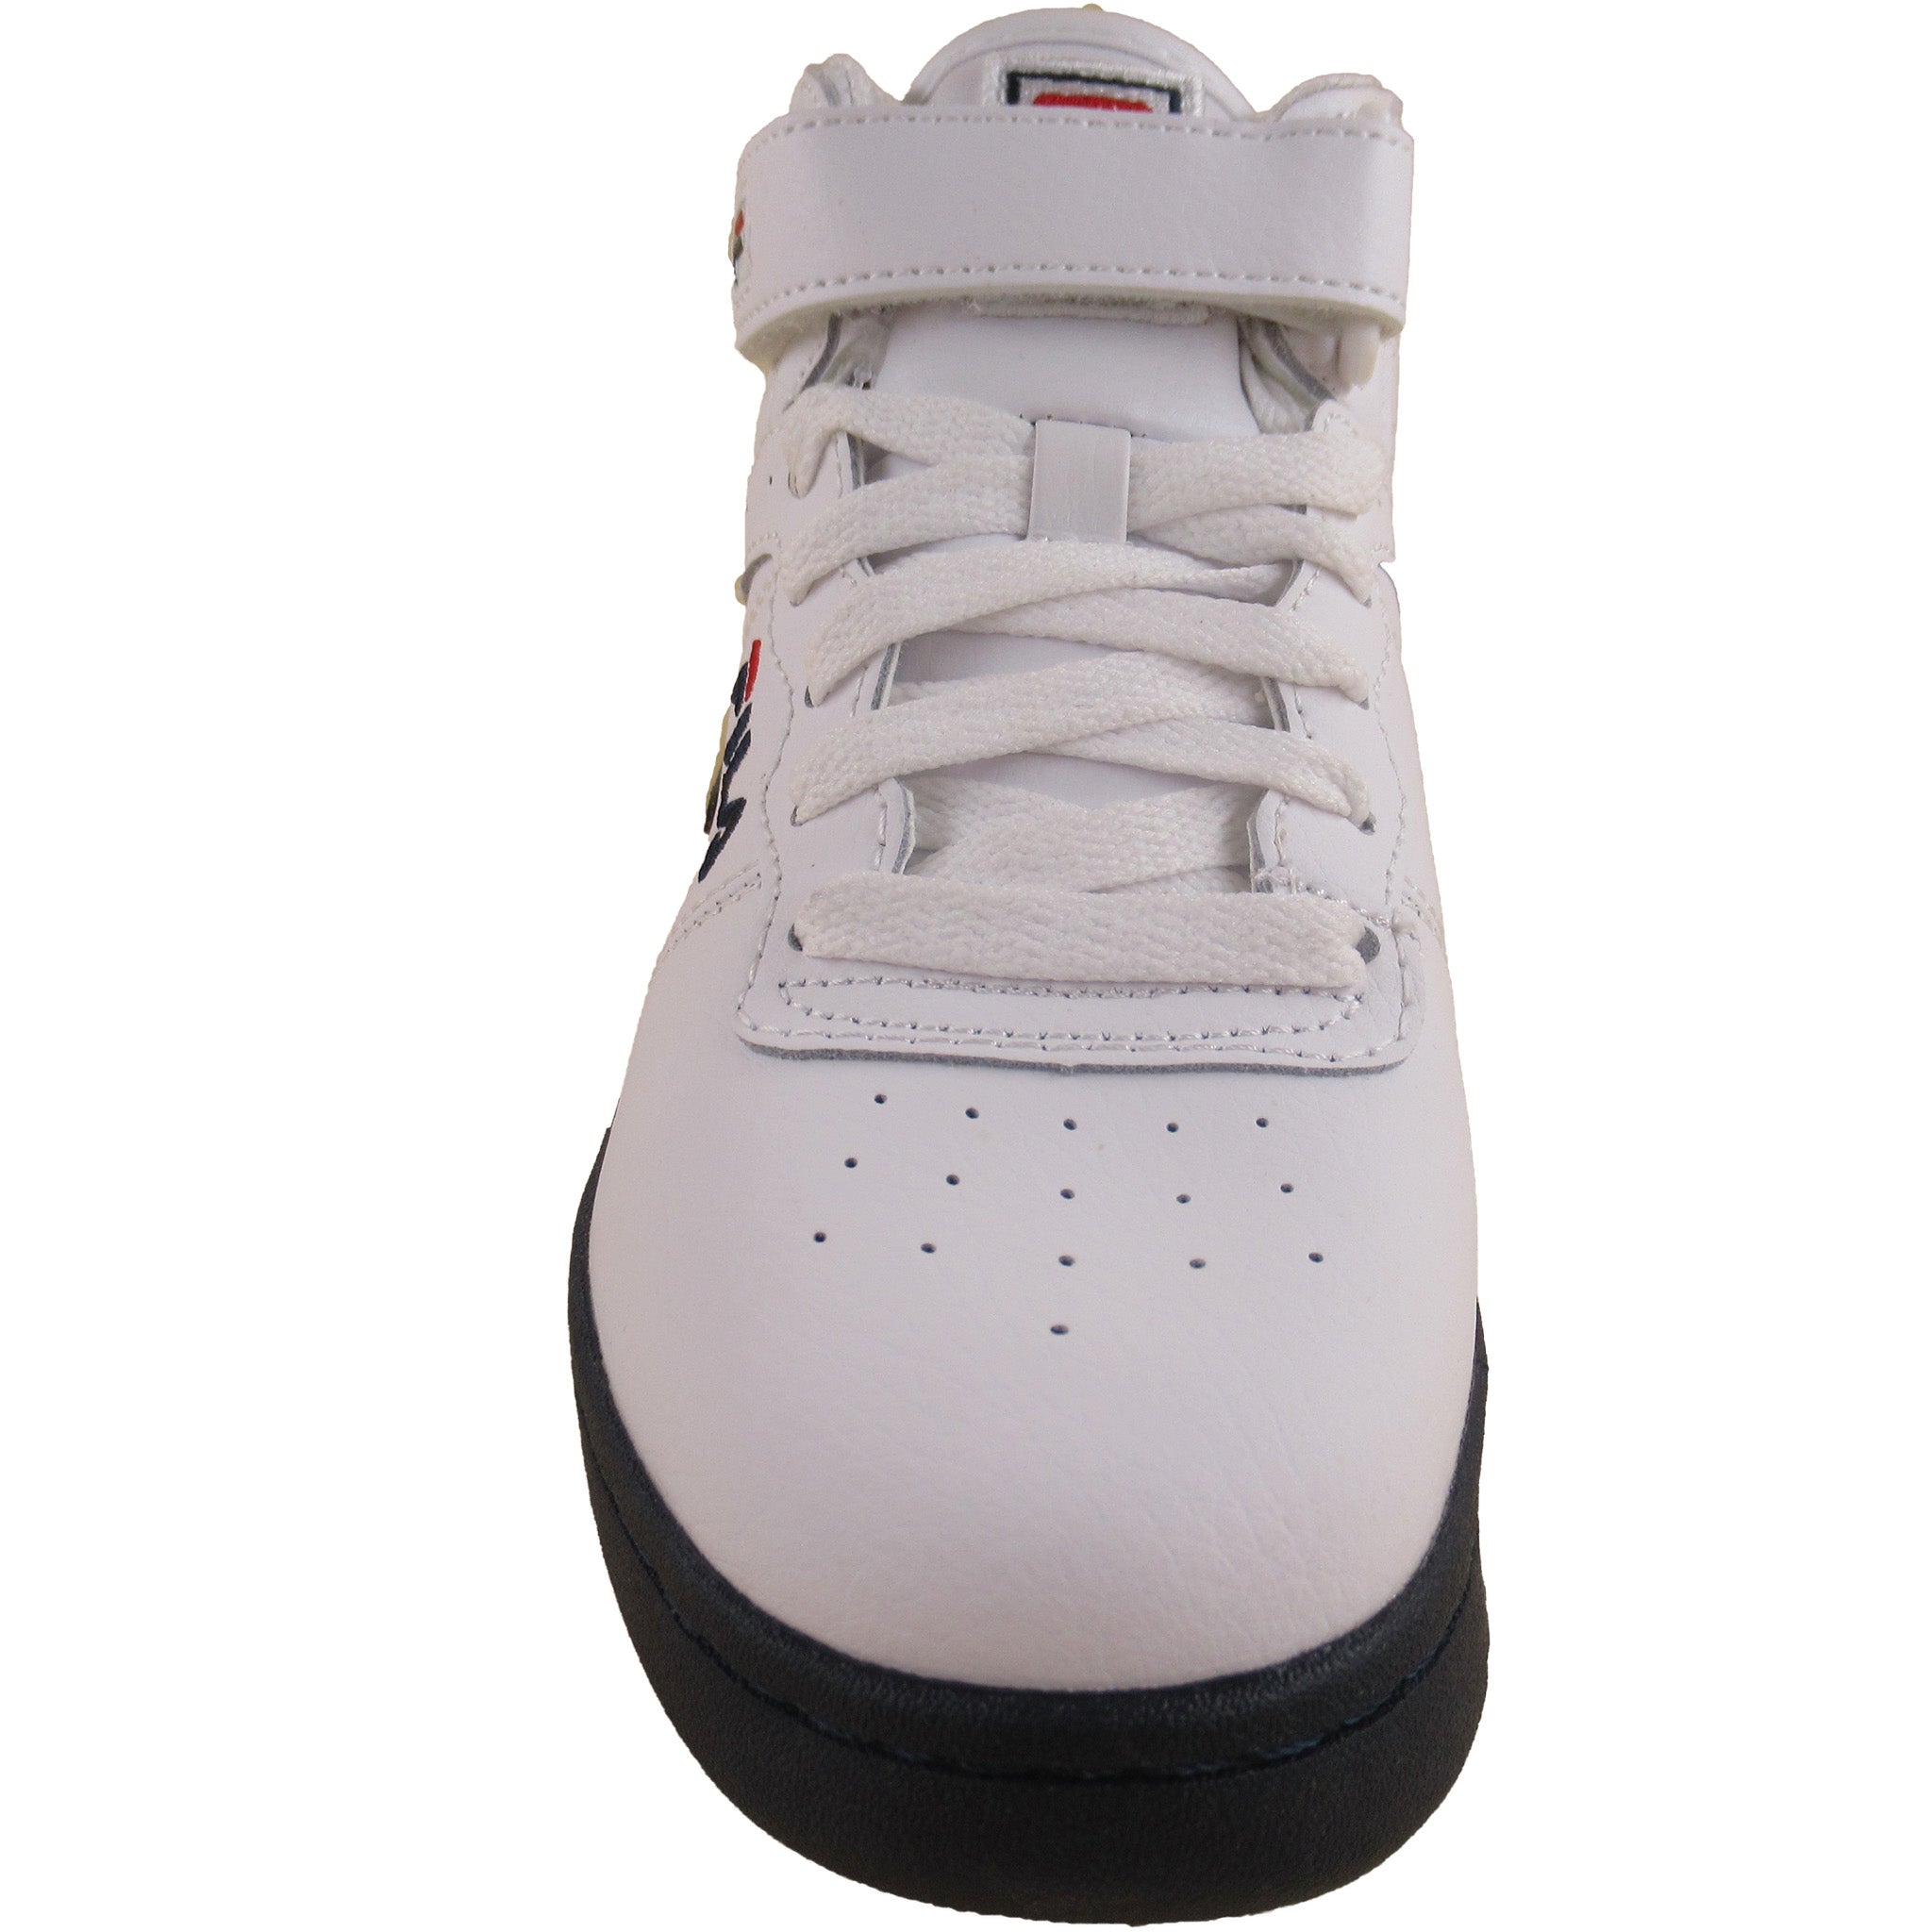 More Grade-School White Kids Casual Red Navy – F-13 Athletic and Shoes Fila That Store Shoe